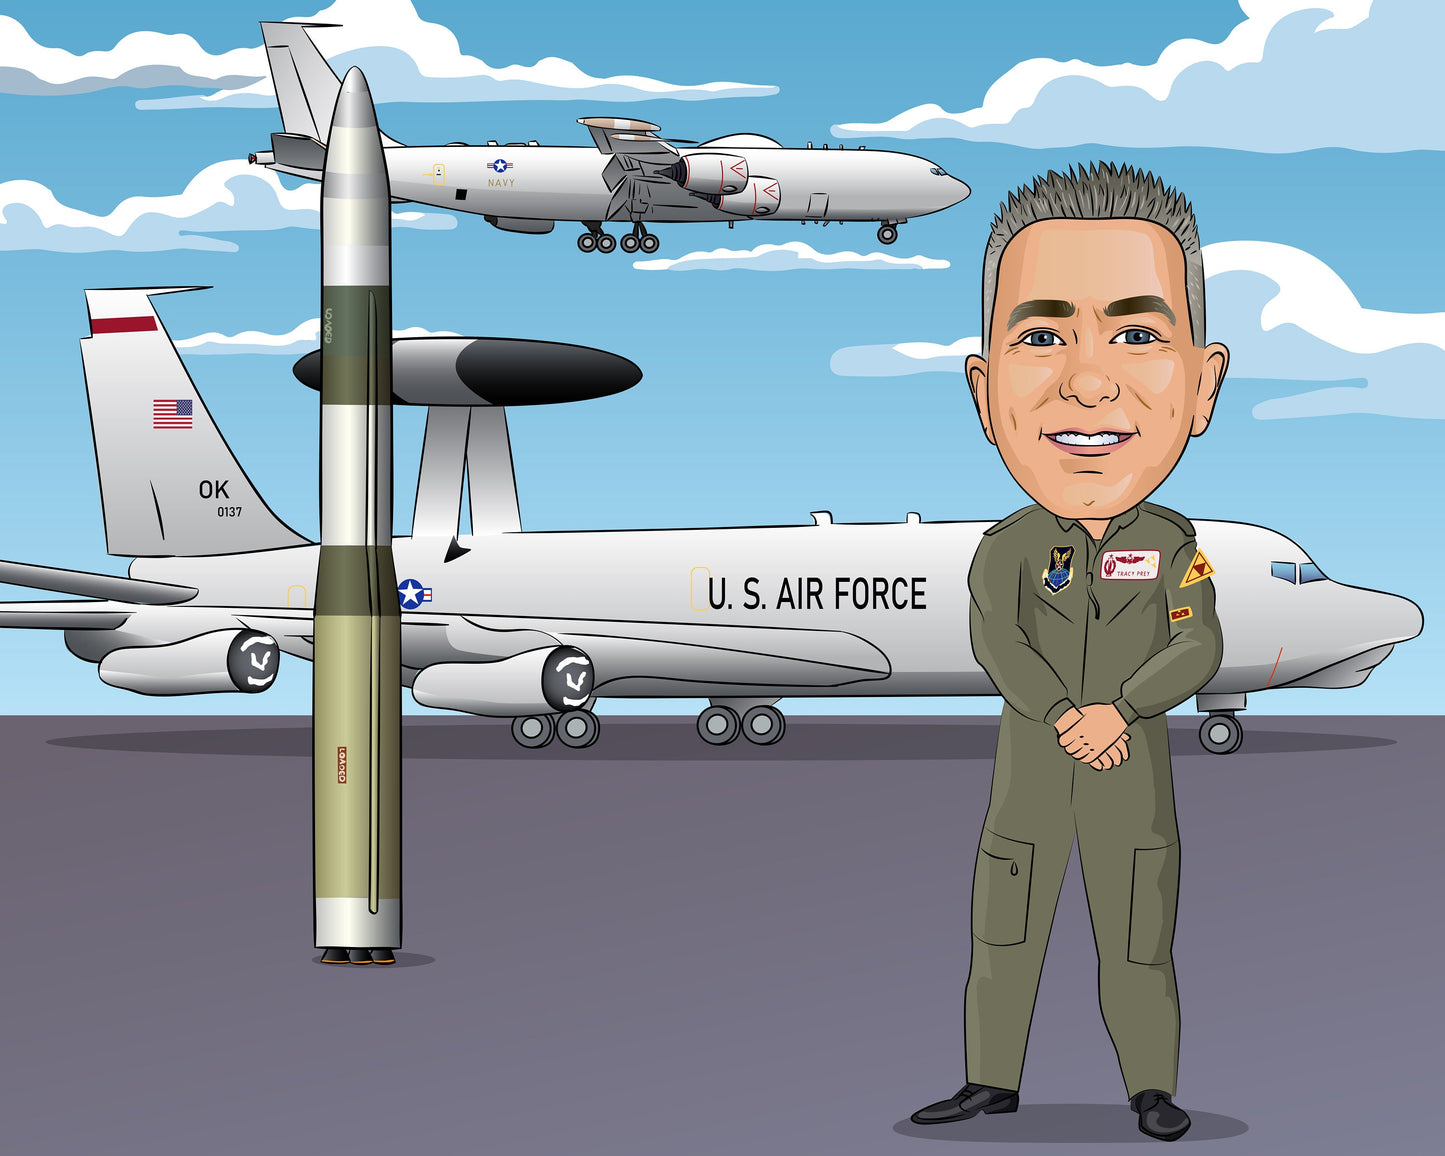 Air Force Pilot Gift - Custom Caricature From Your Photo, Air Force Retirement, military pilot